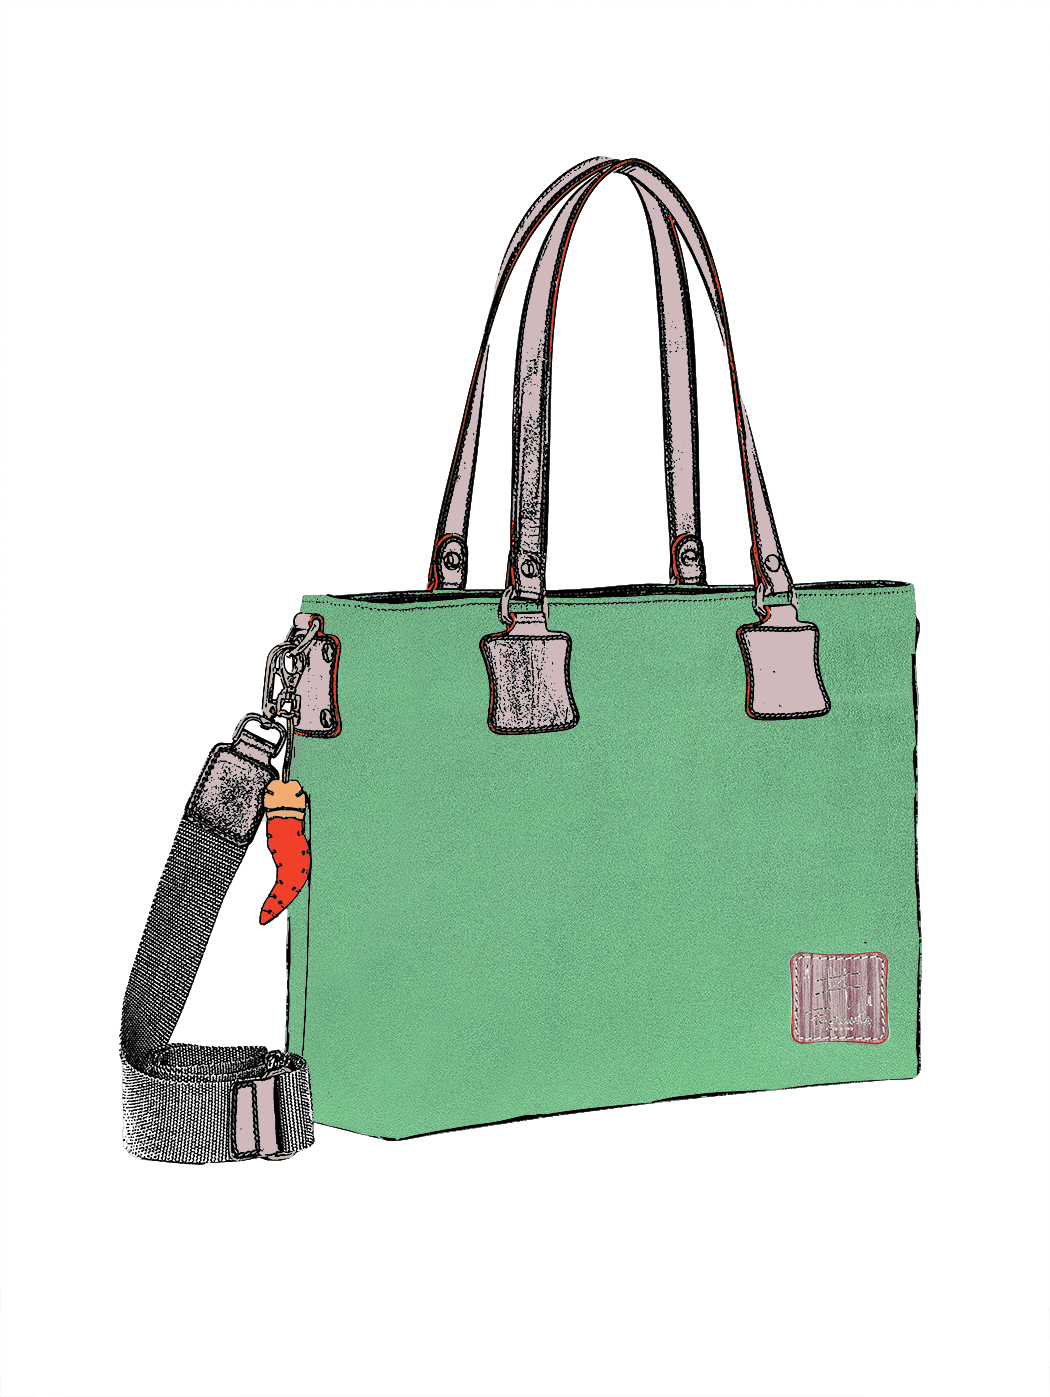 Ostrich Leather Bauletto Handbag for Women, Handmade in Florence